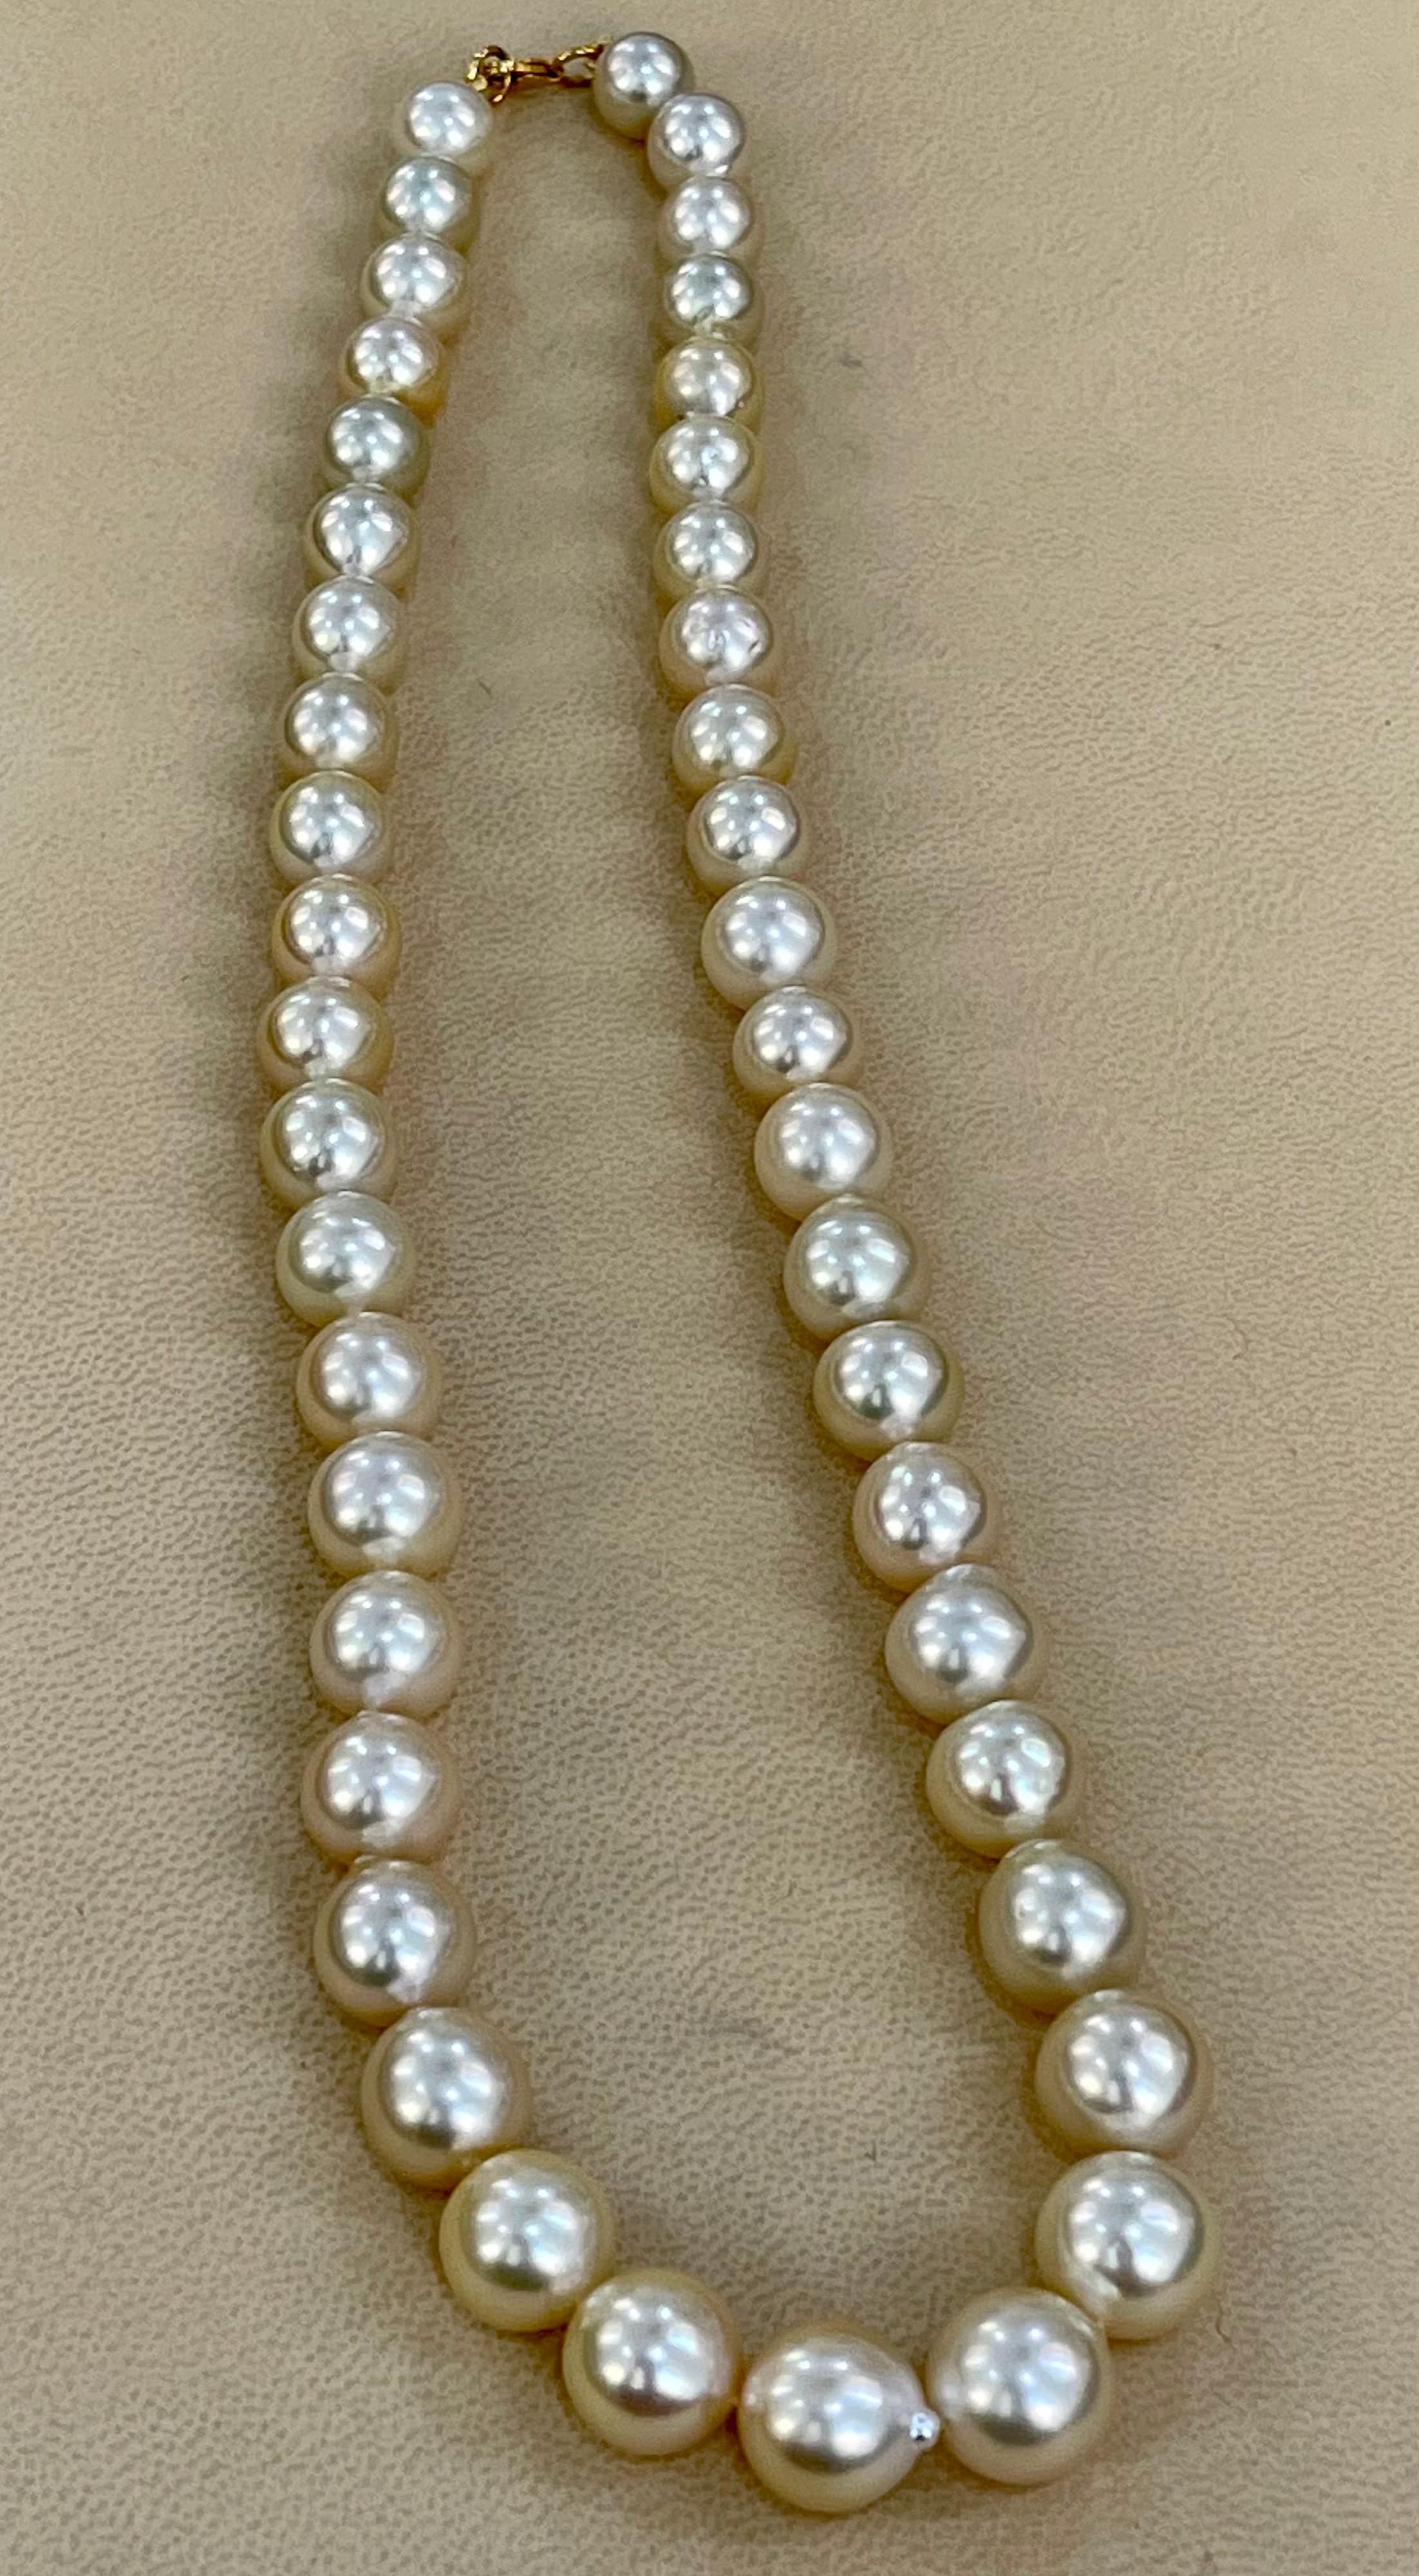 Graduating Cream Color South Sea Pearls Necklace 14 Karat Yellow Gold Clasp For Sale 6